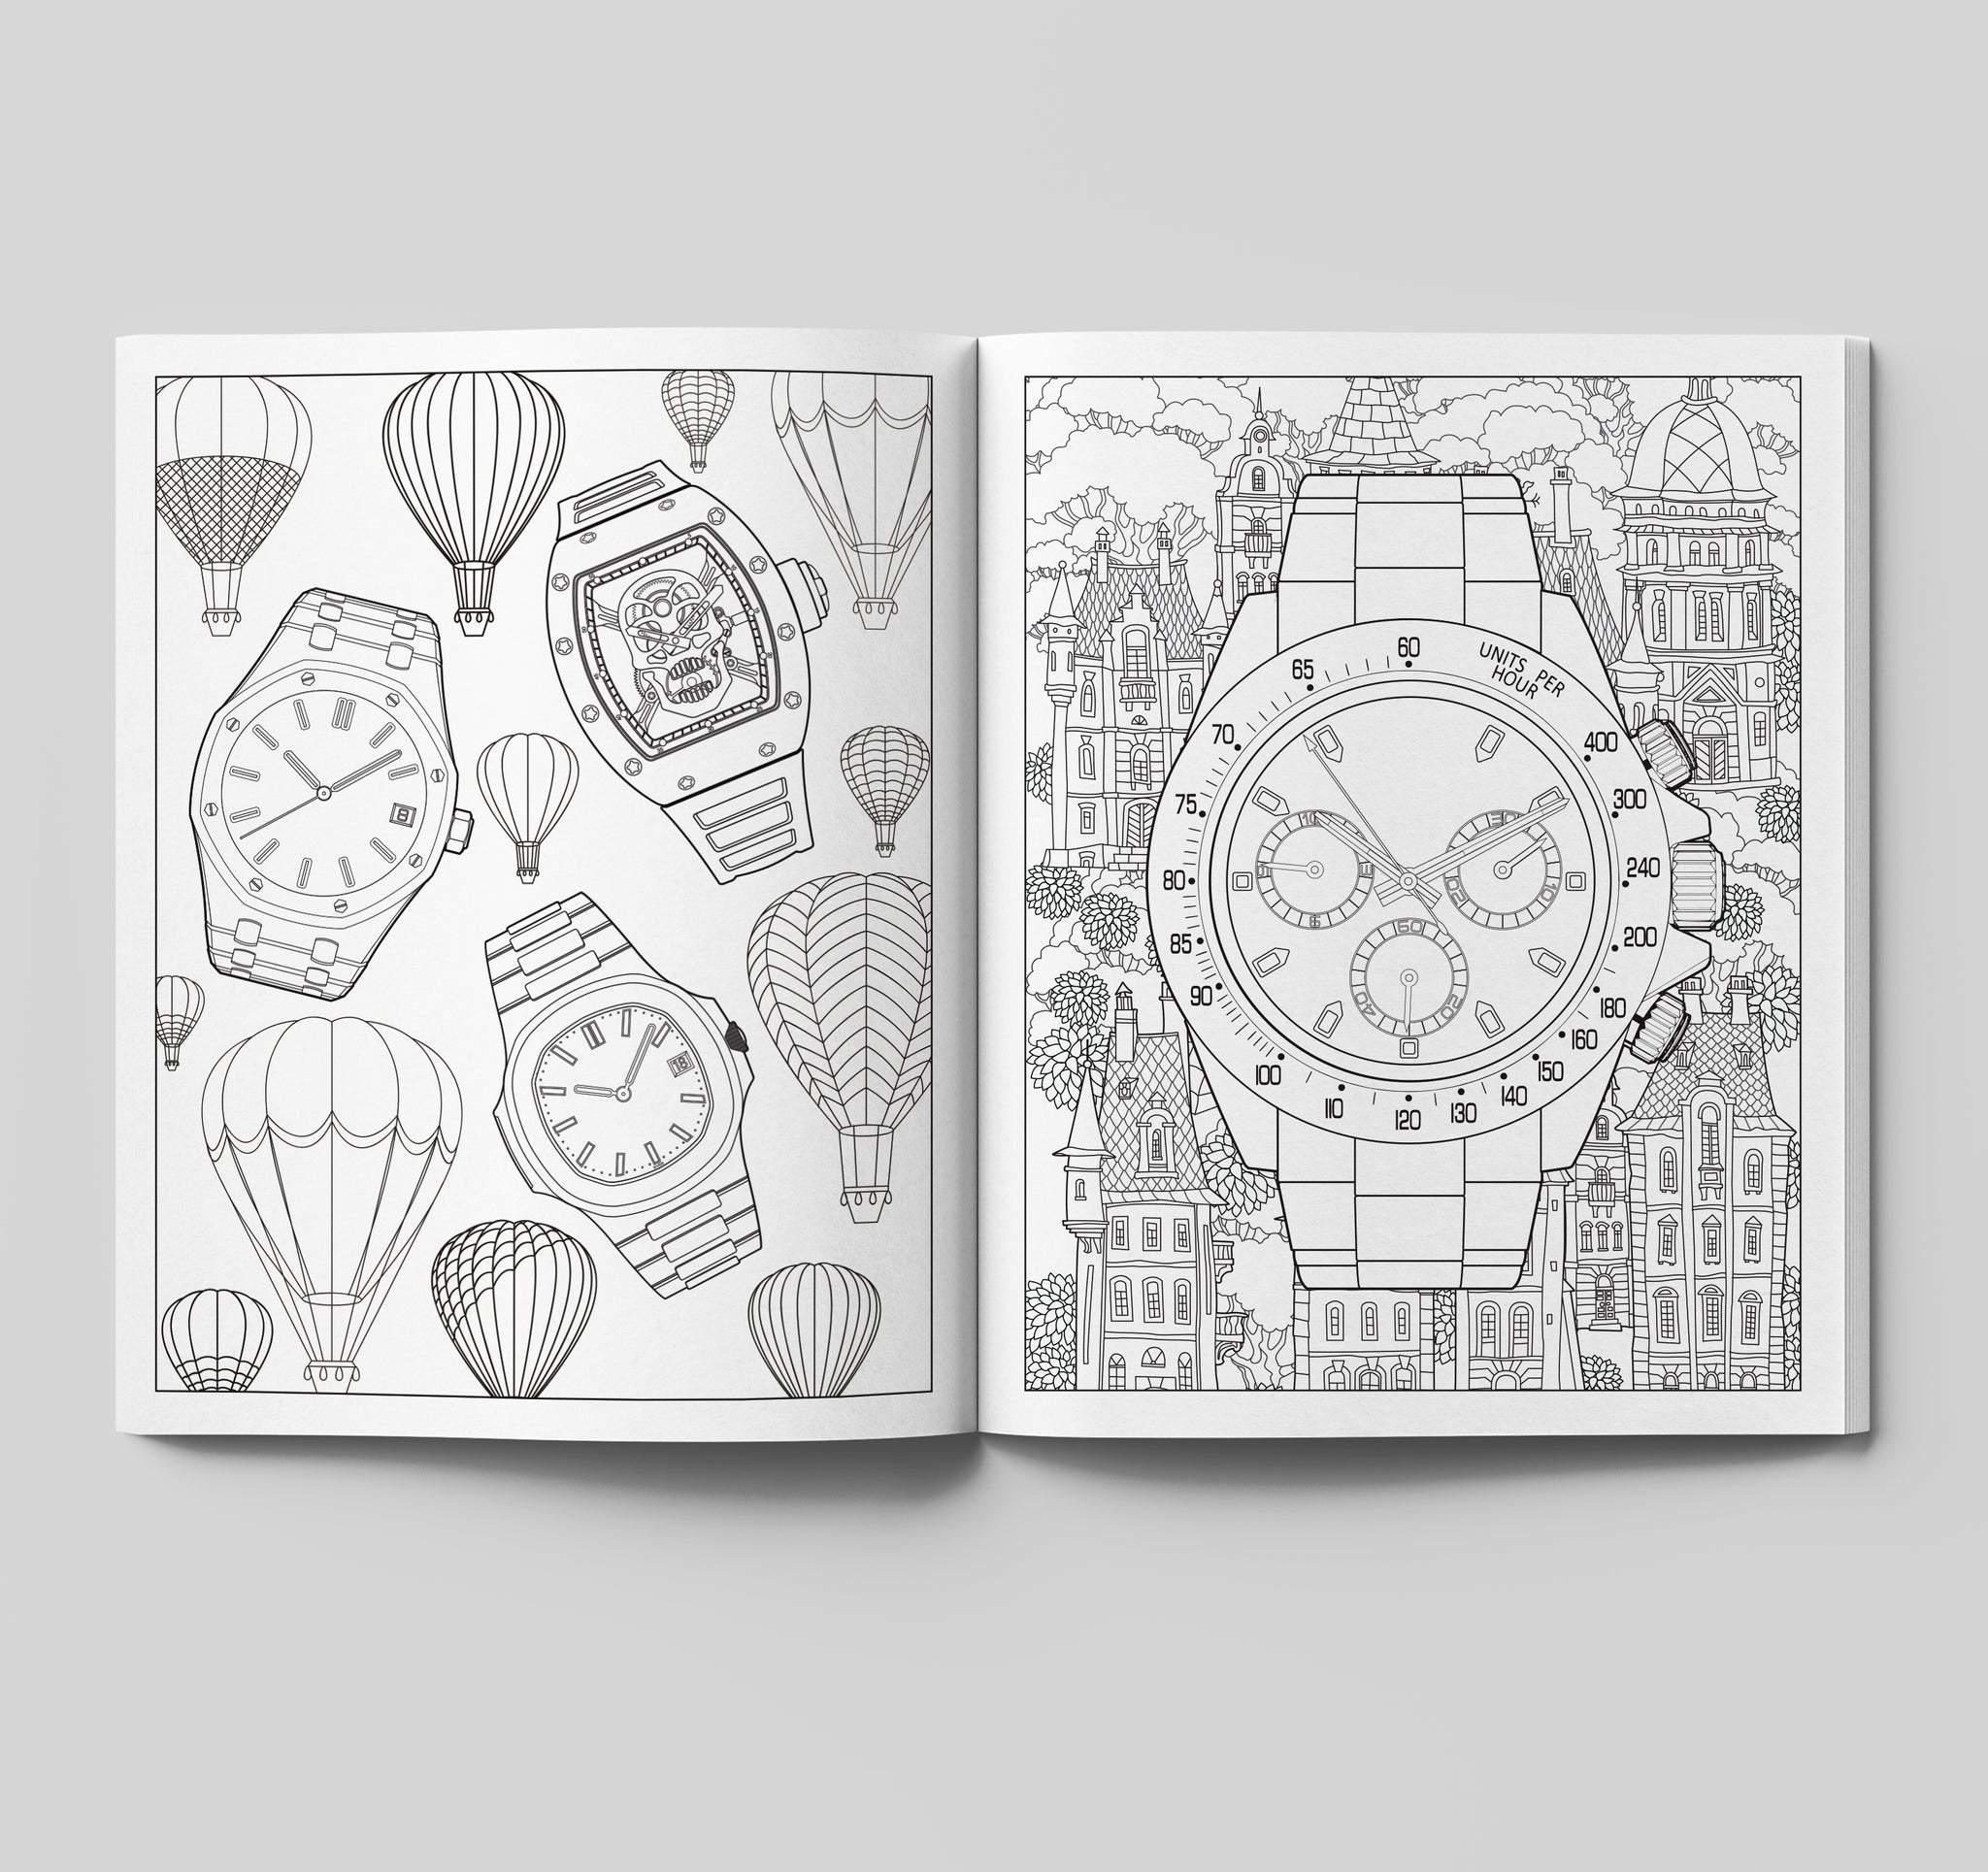 The watch collectors coloring book â